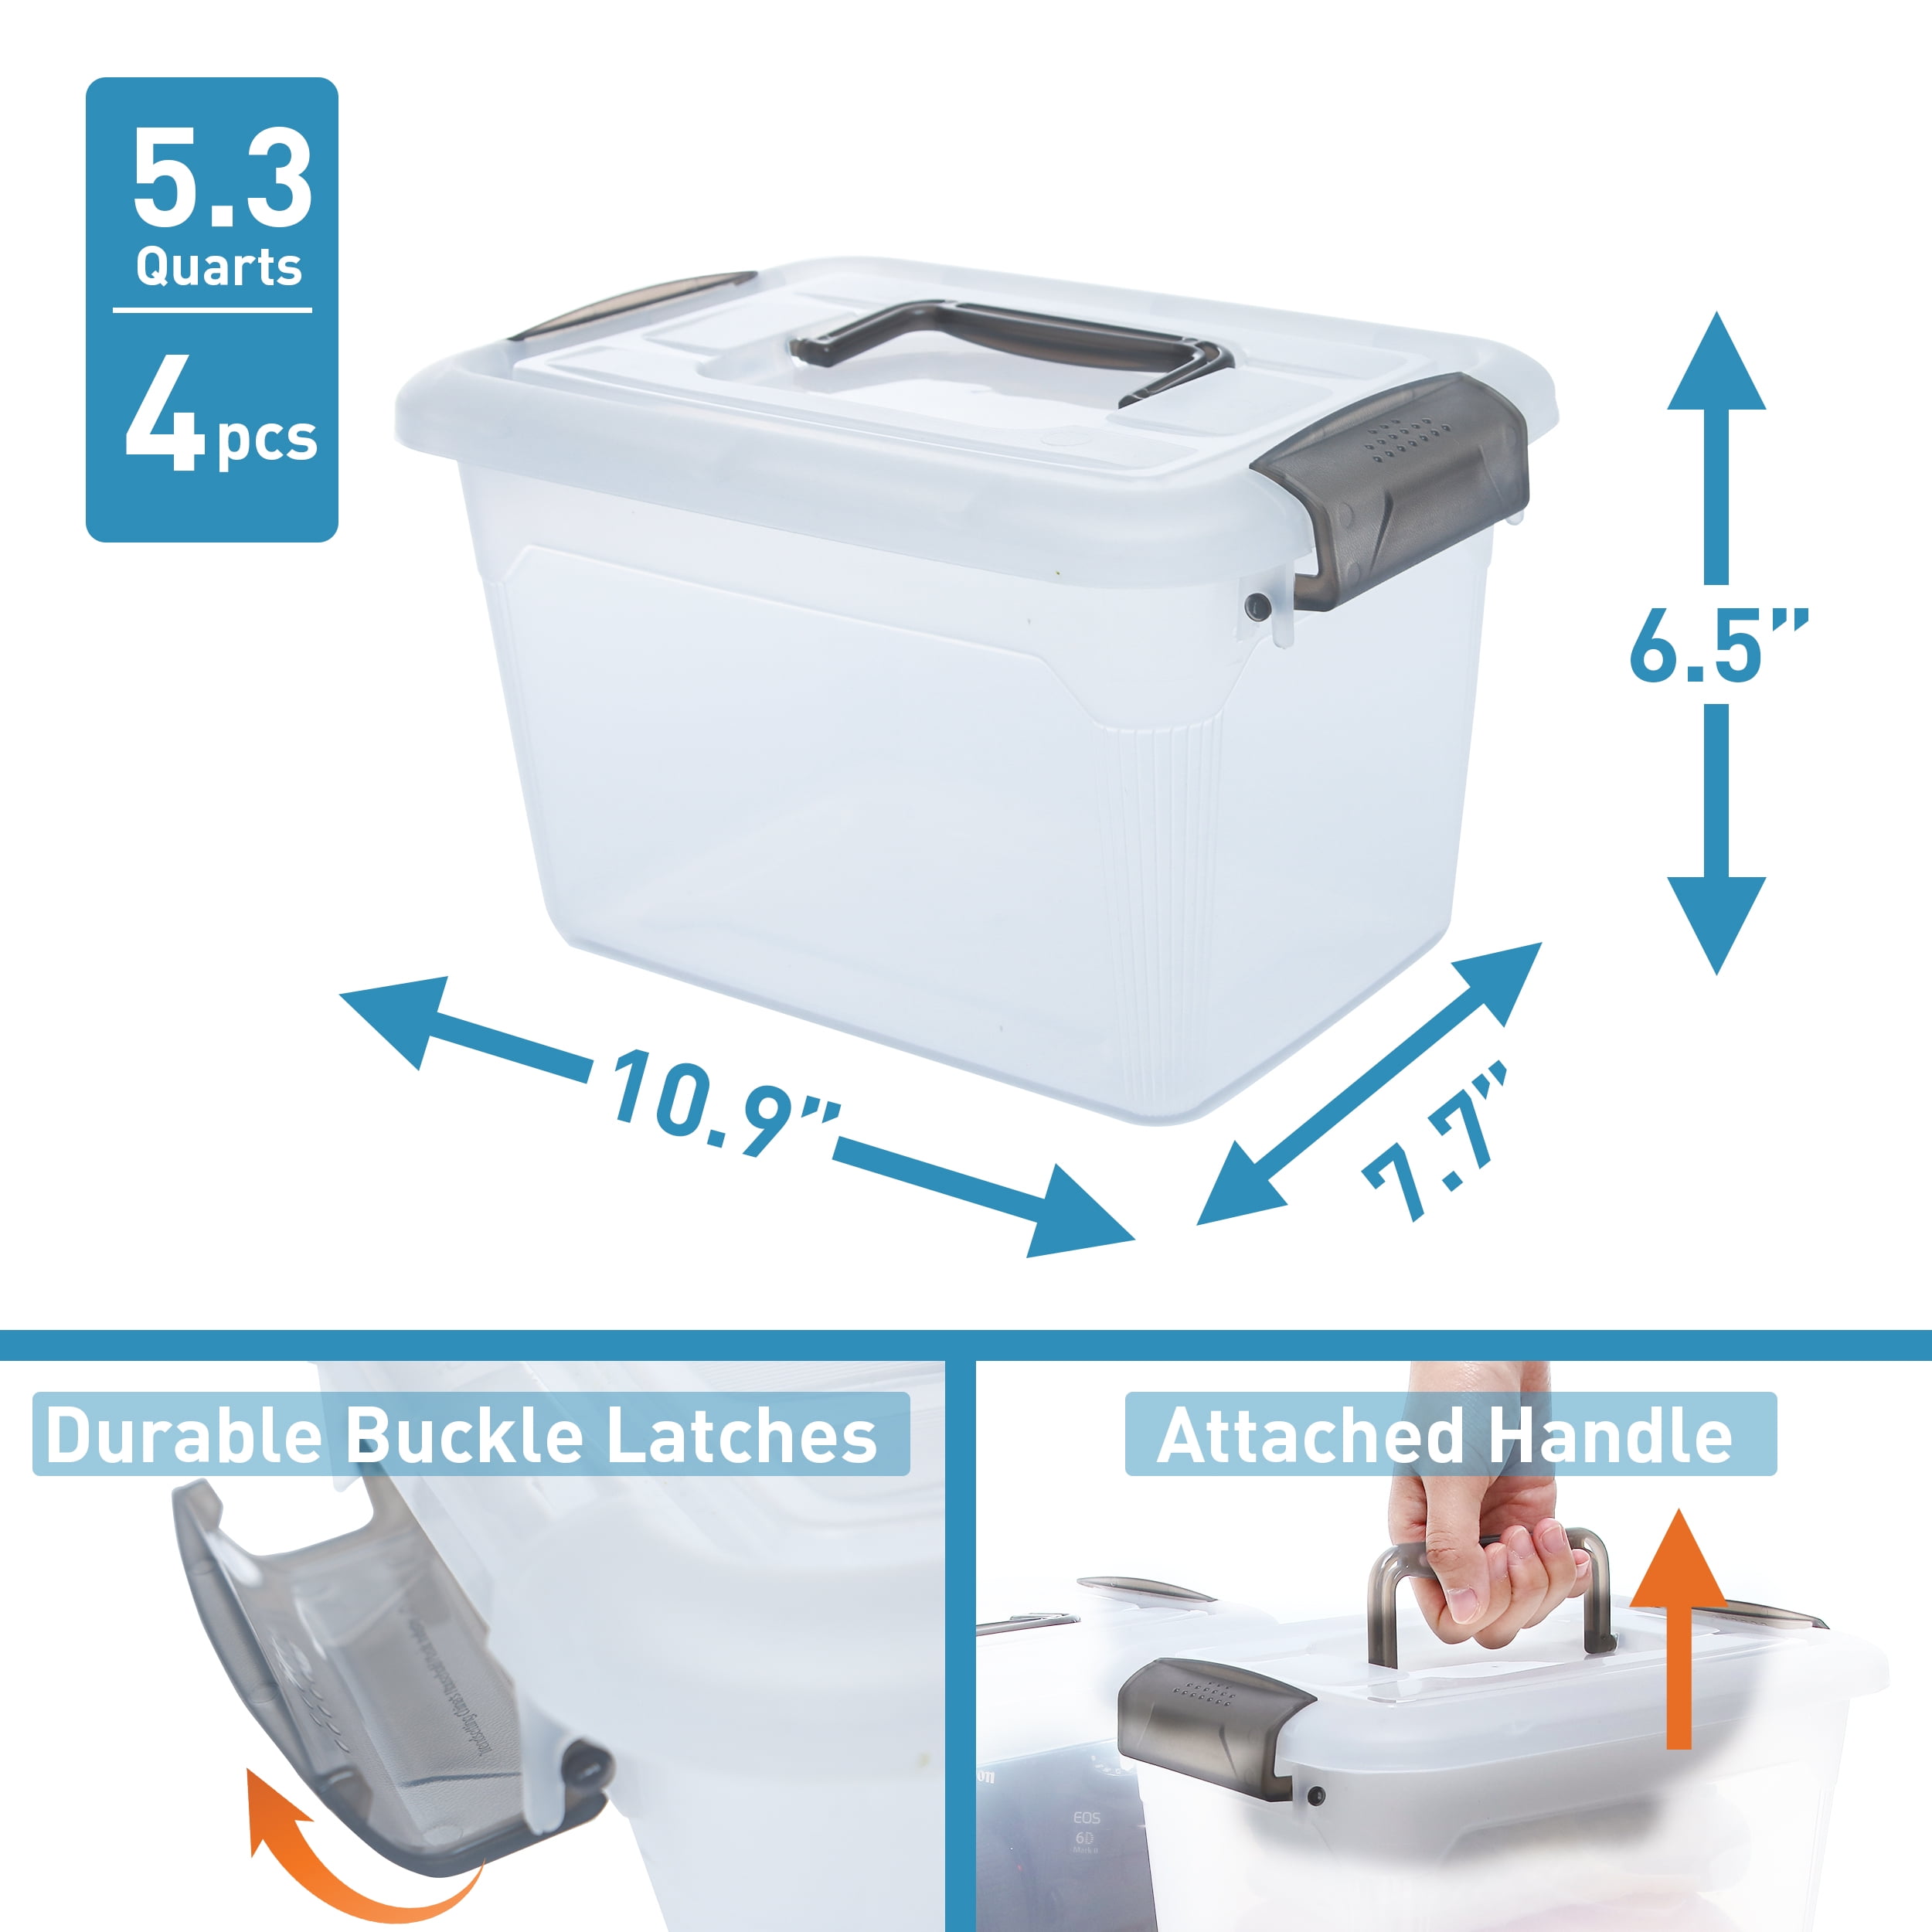 Citylife 32 QT Plastic Storage Bins with Removable Compartments